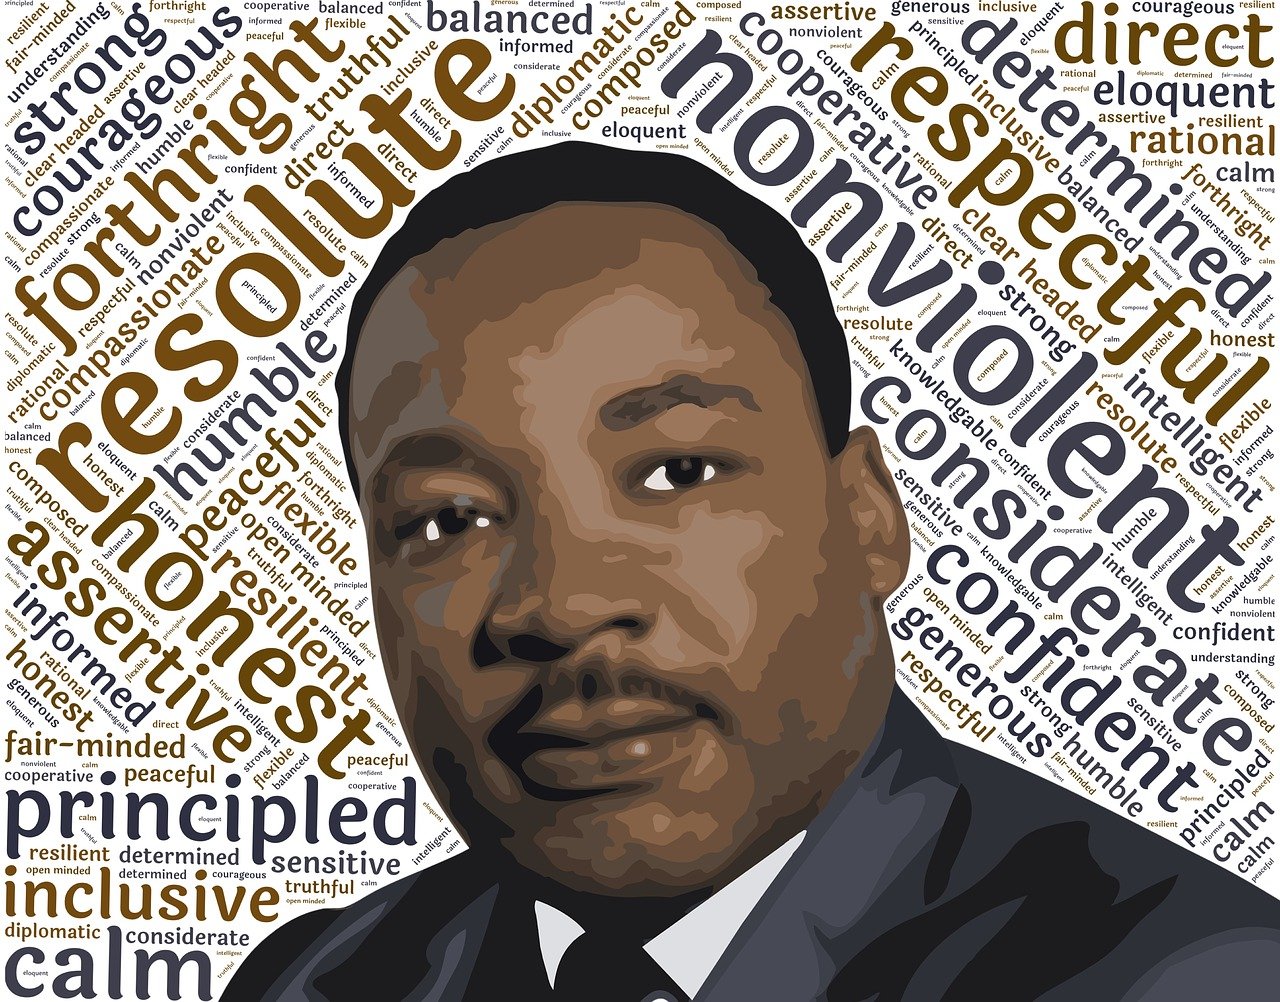 dr. martin luther king jr day